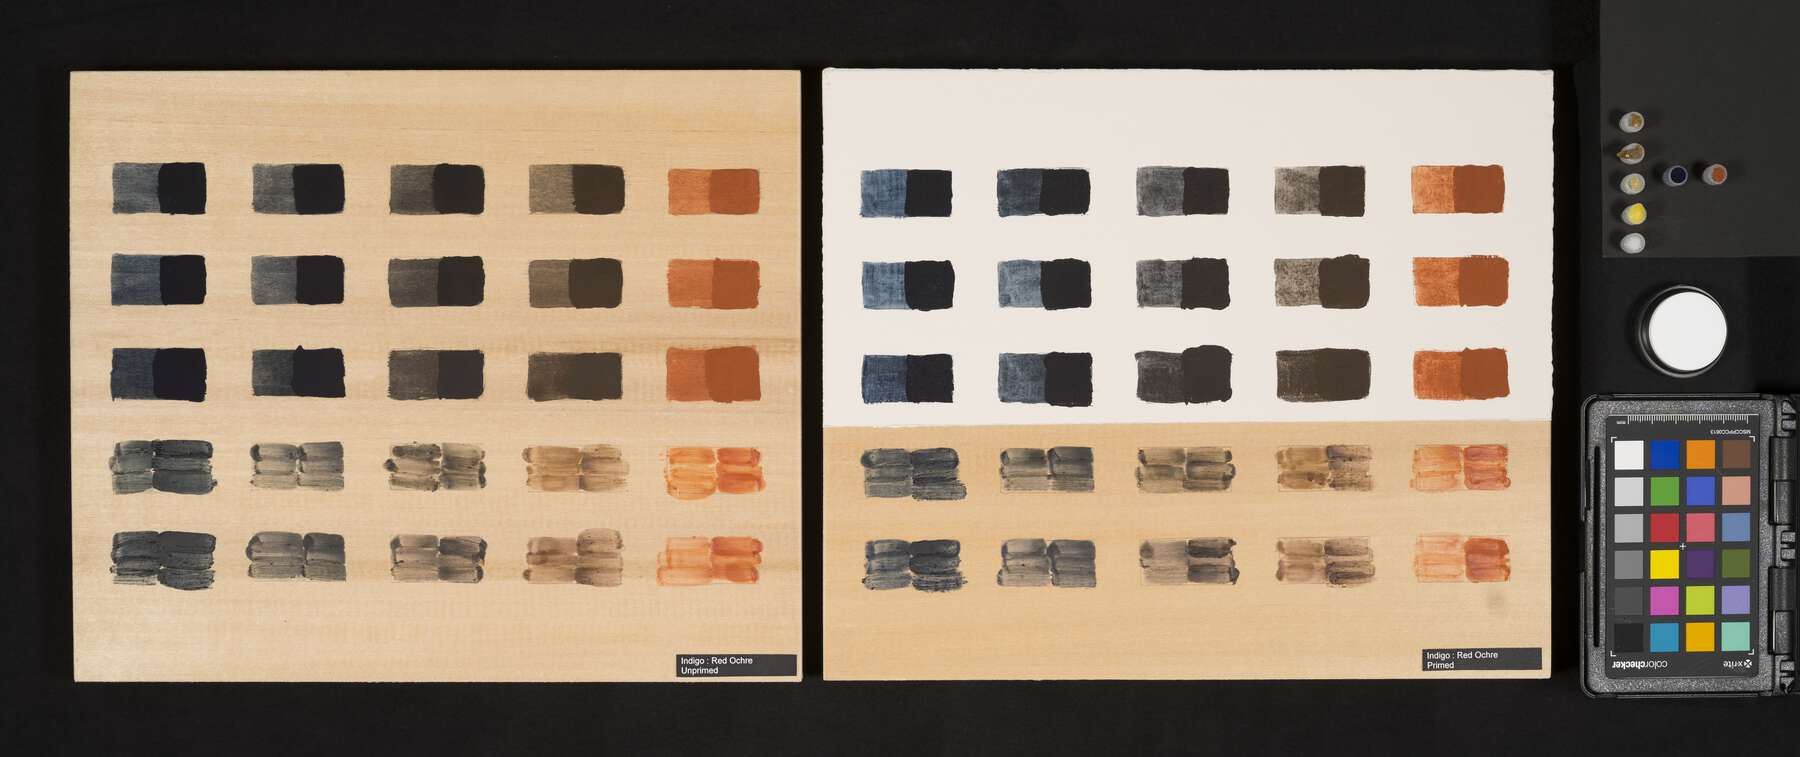 Commercial ochre pigments (Kremer Pigments). From left to right: light